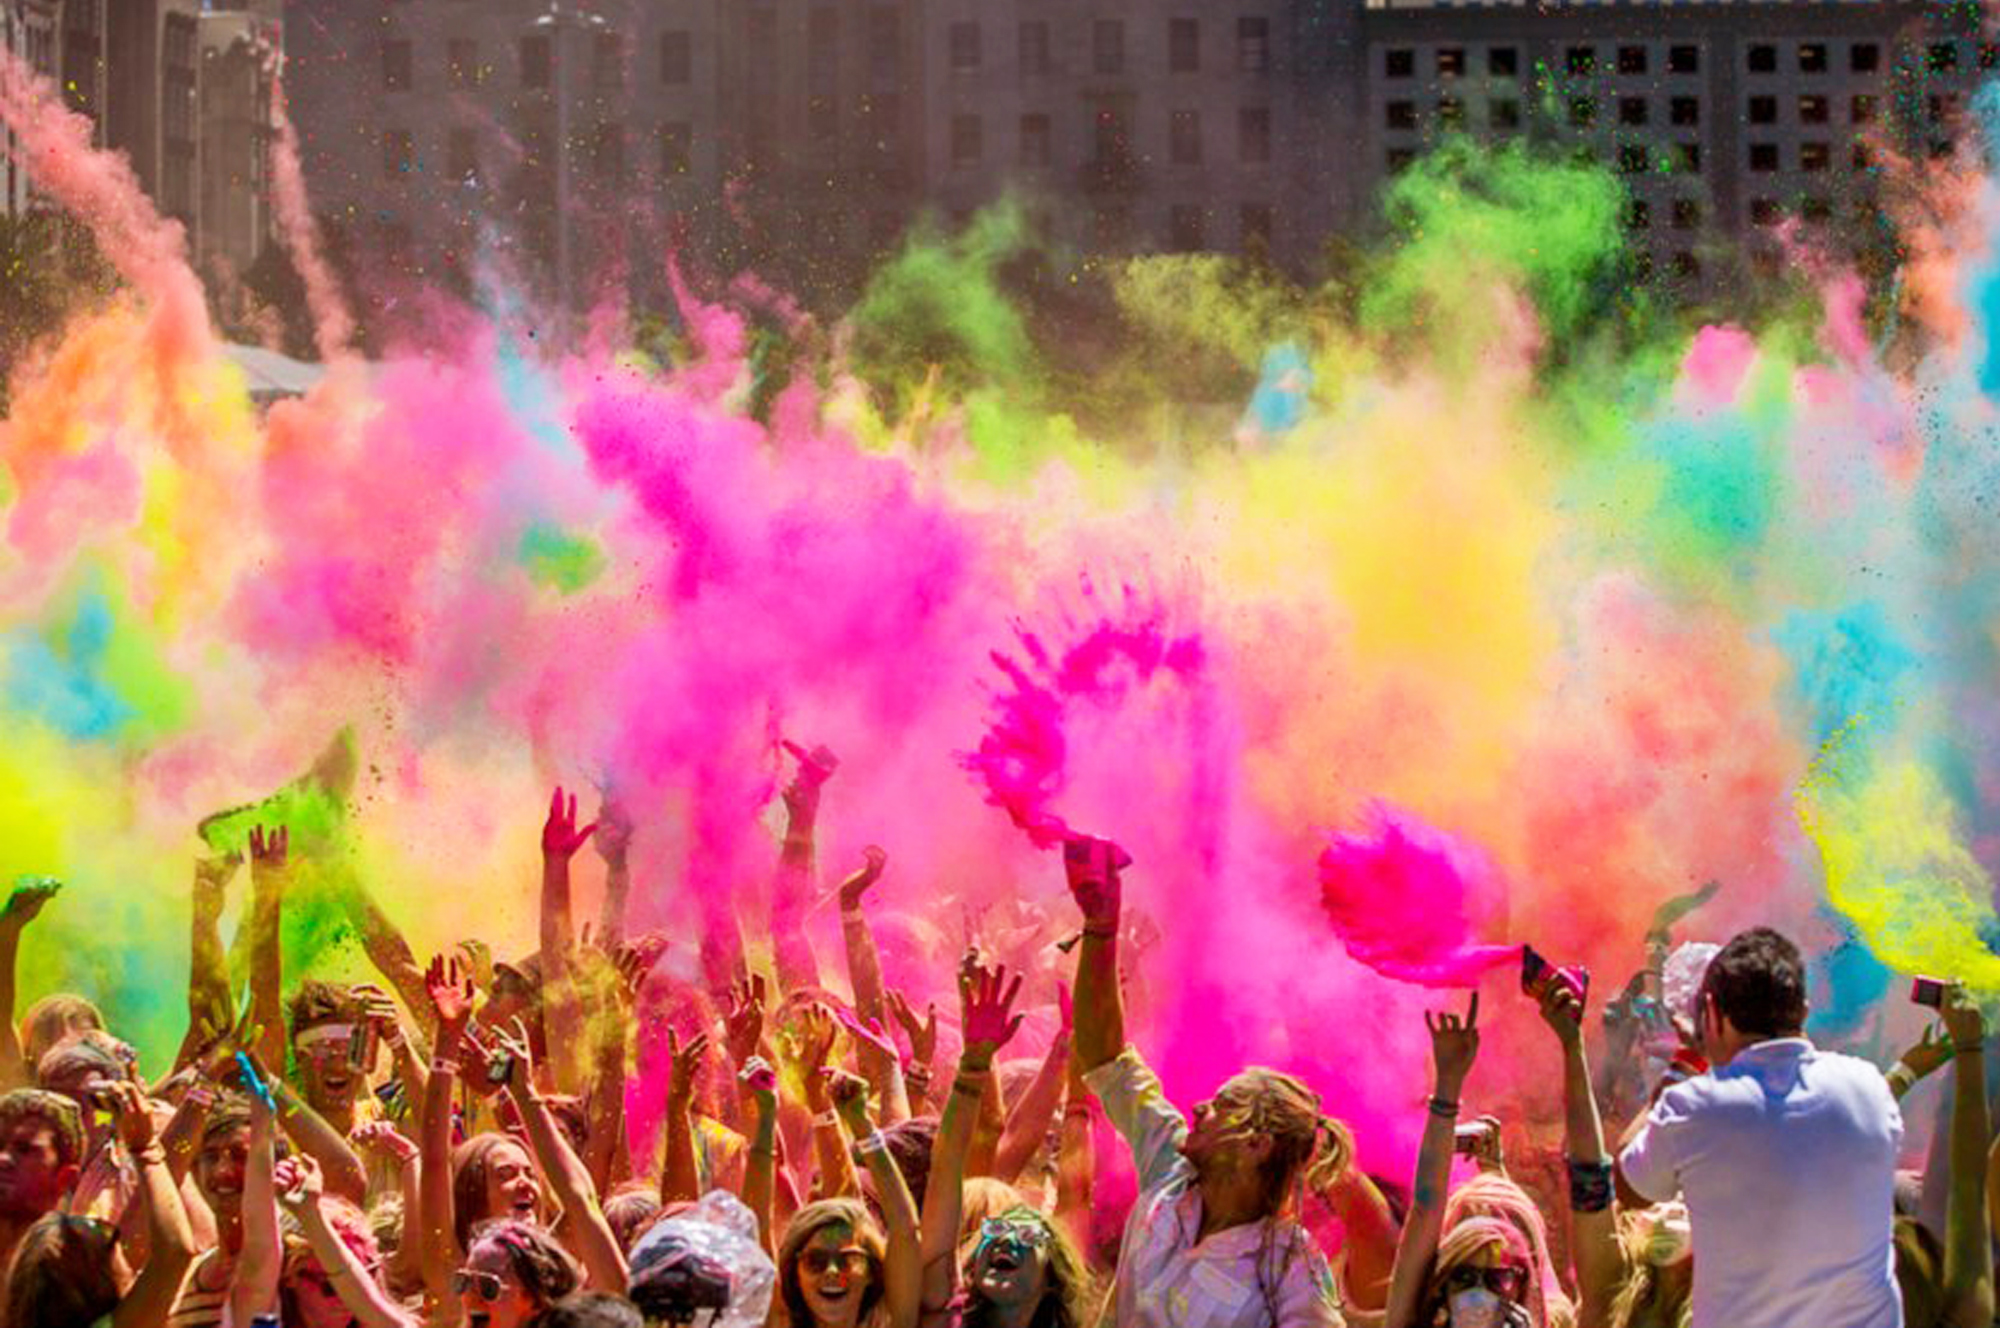 Happy Holi HD Images, Wallpapers, Pics (Free Download)